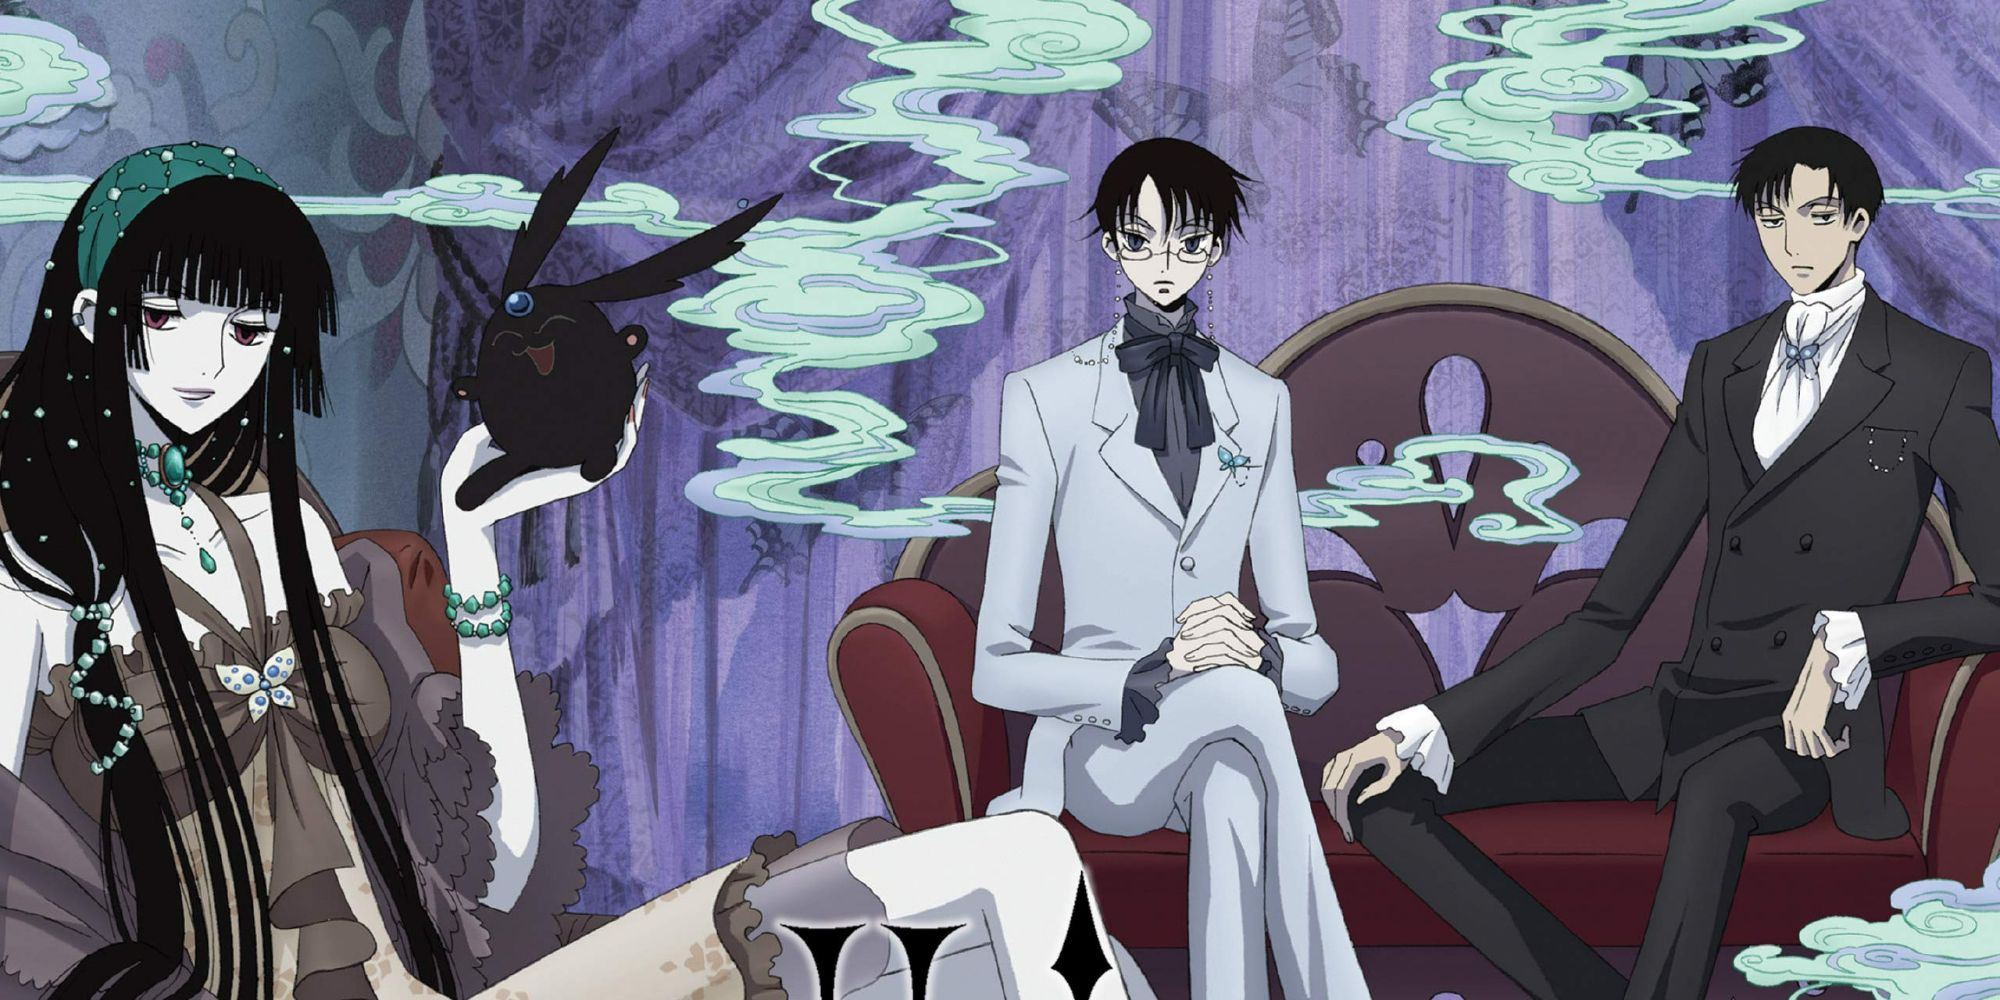 Three main characters from xxxHolic sitting together